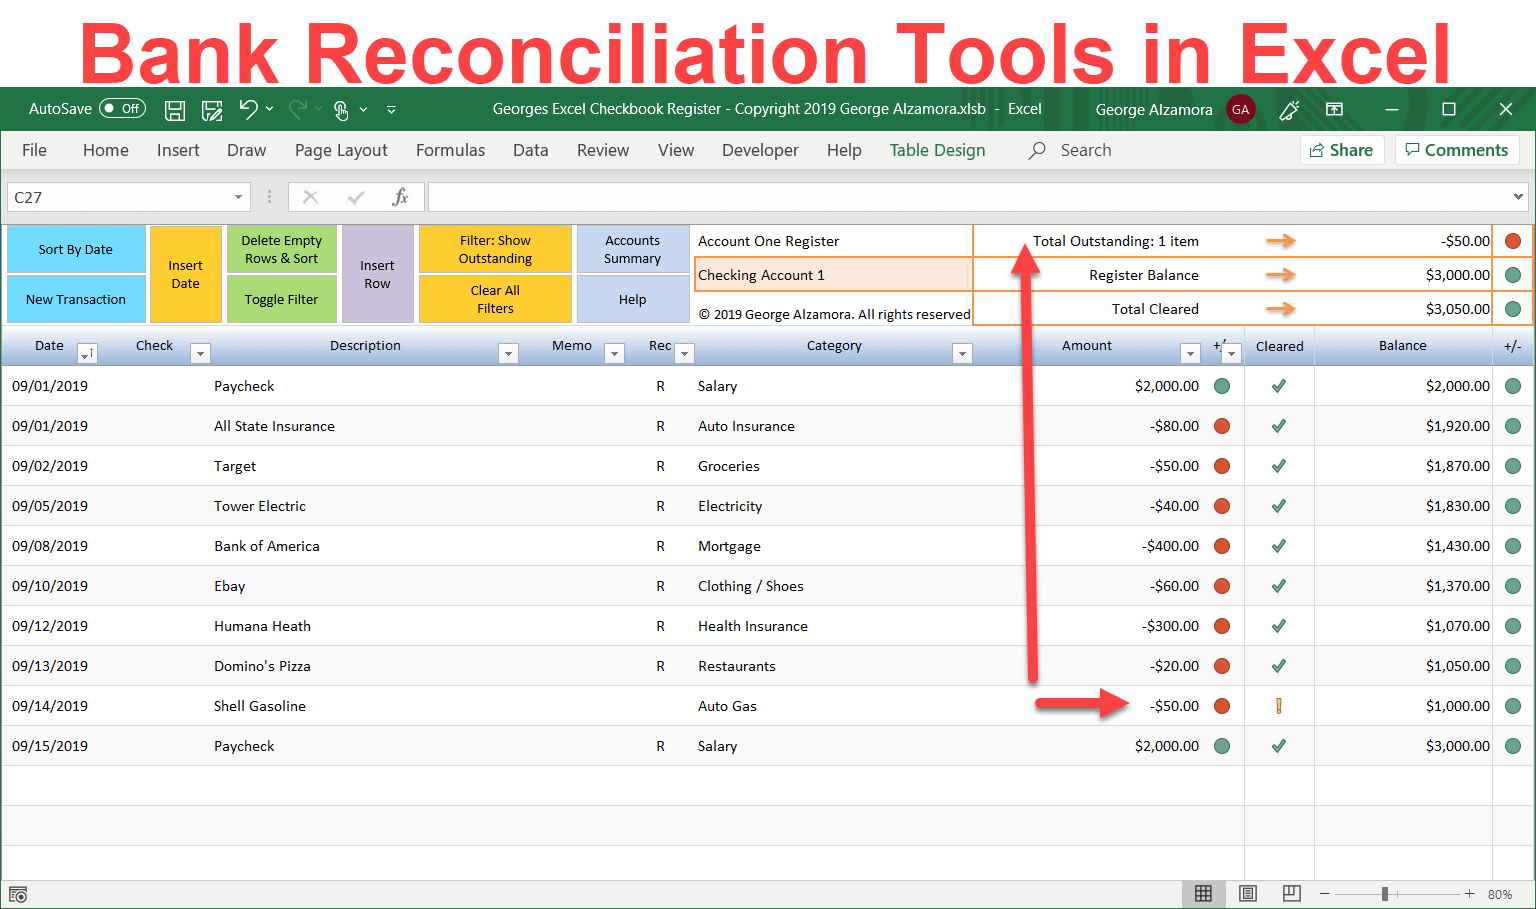 How to reconcile bank account in Excel: Easy